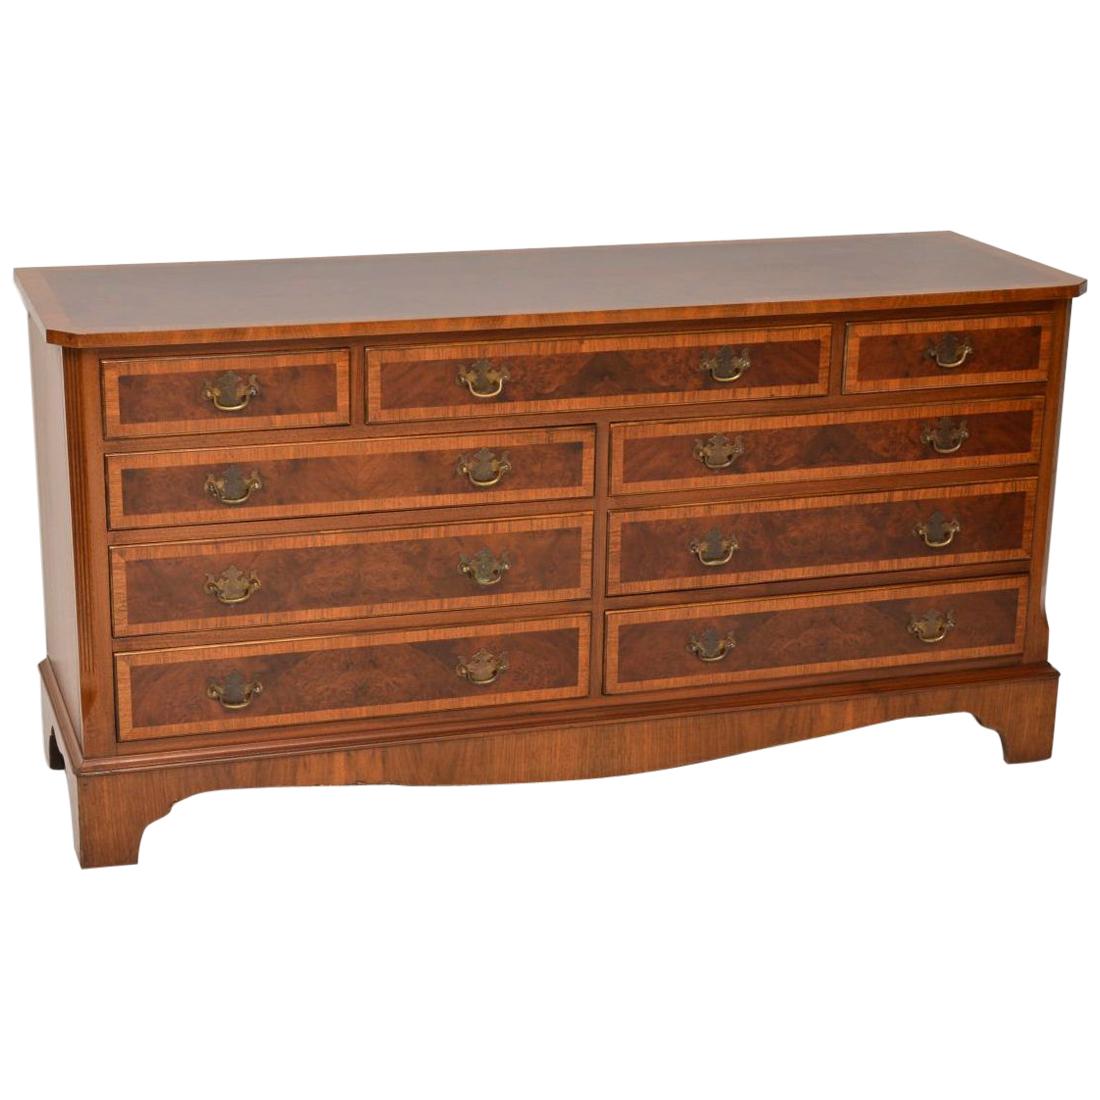 Antique Burr Walnut Long Low Chest of Drawers